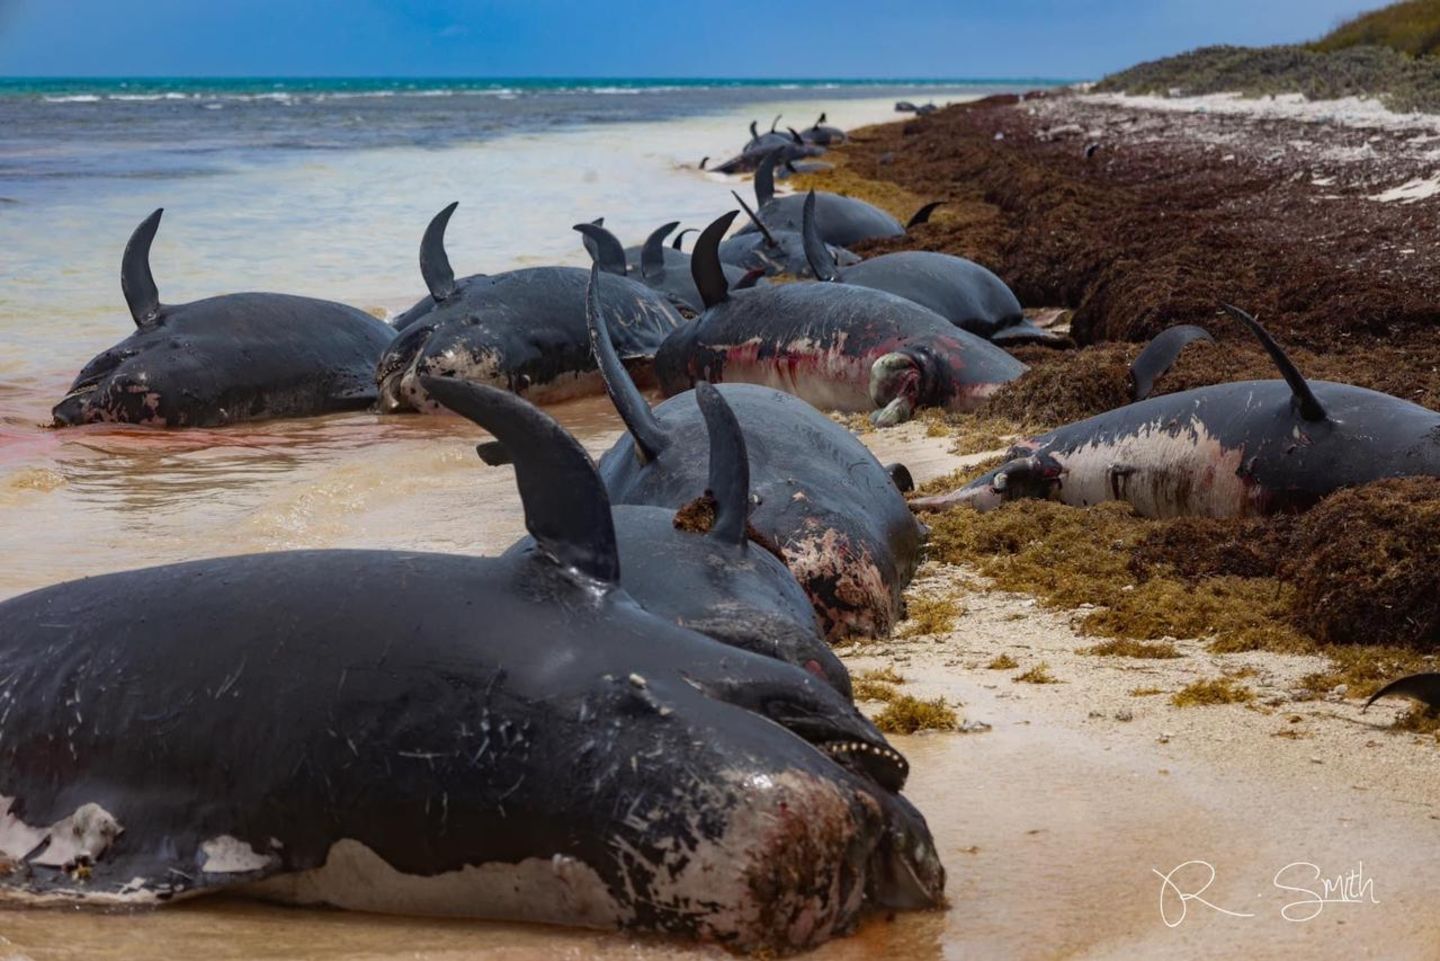 Beached whales in the BVI